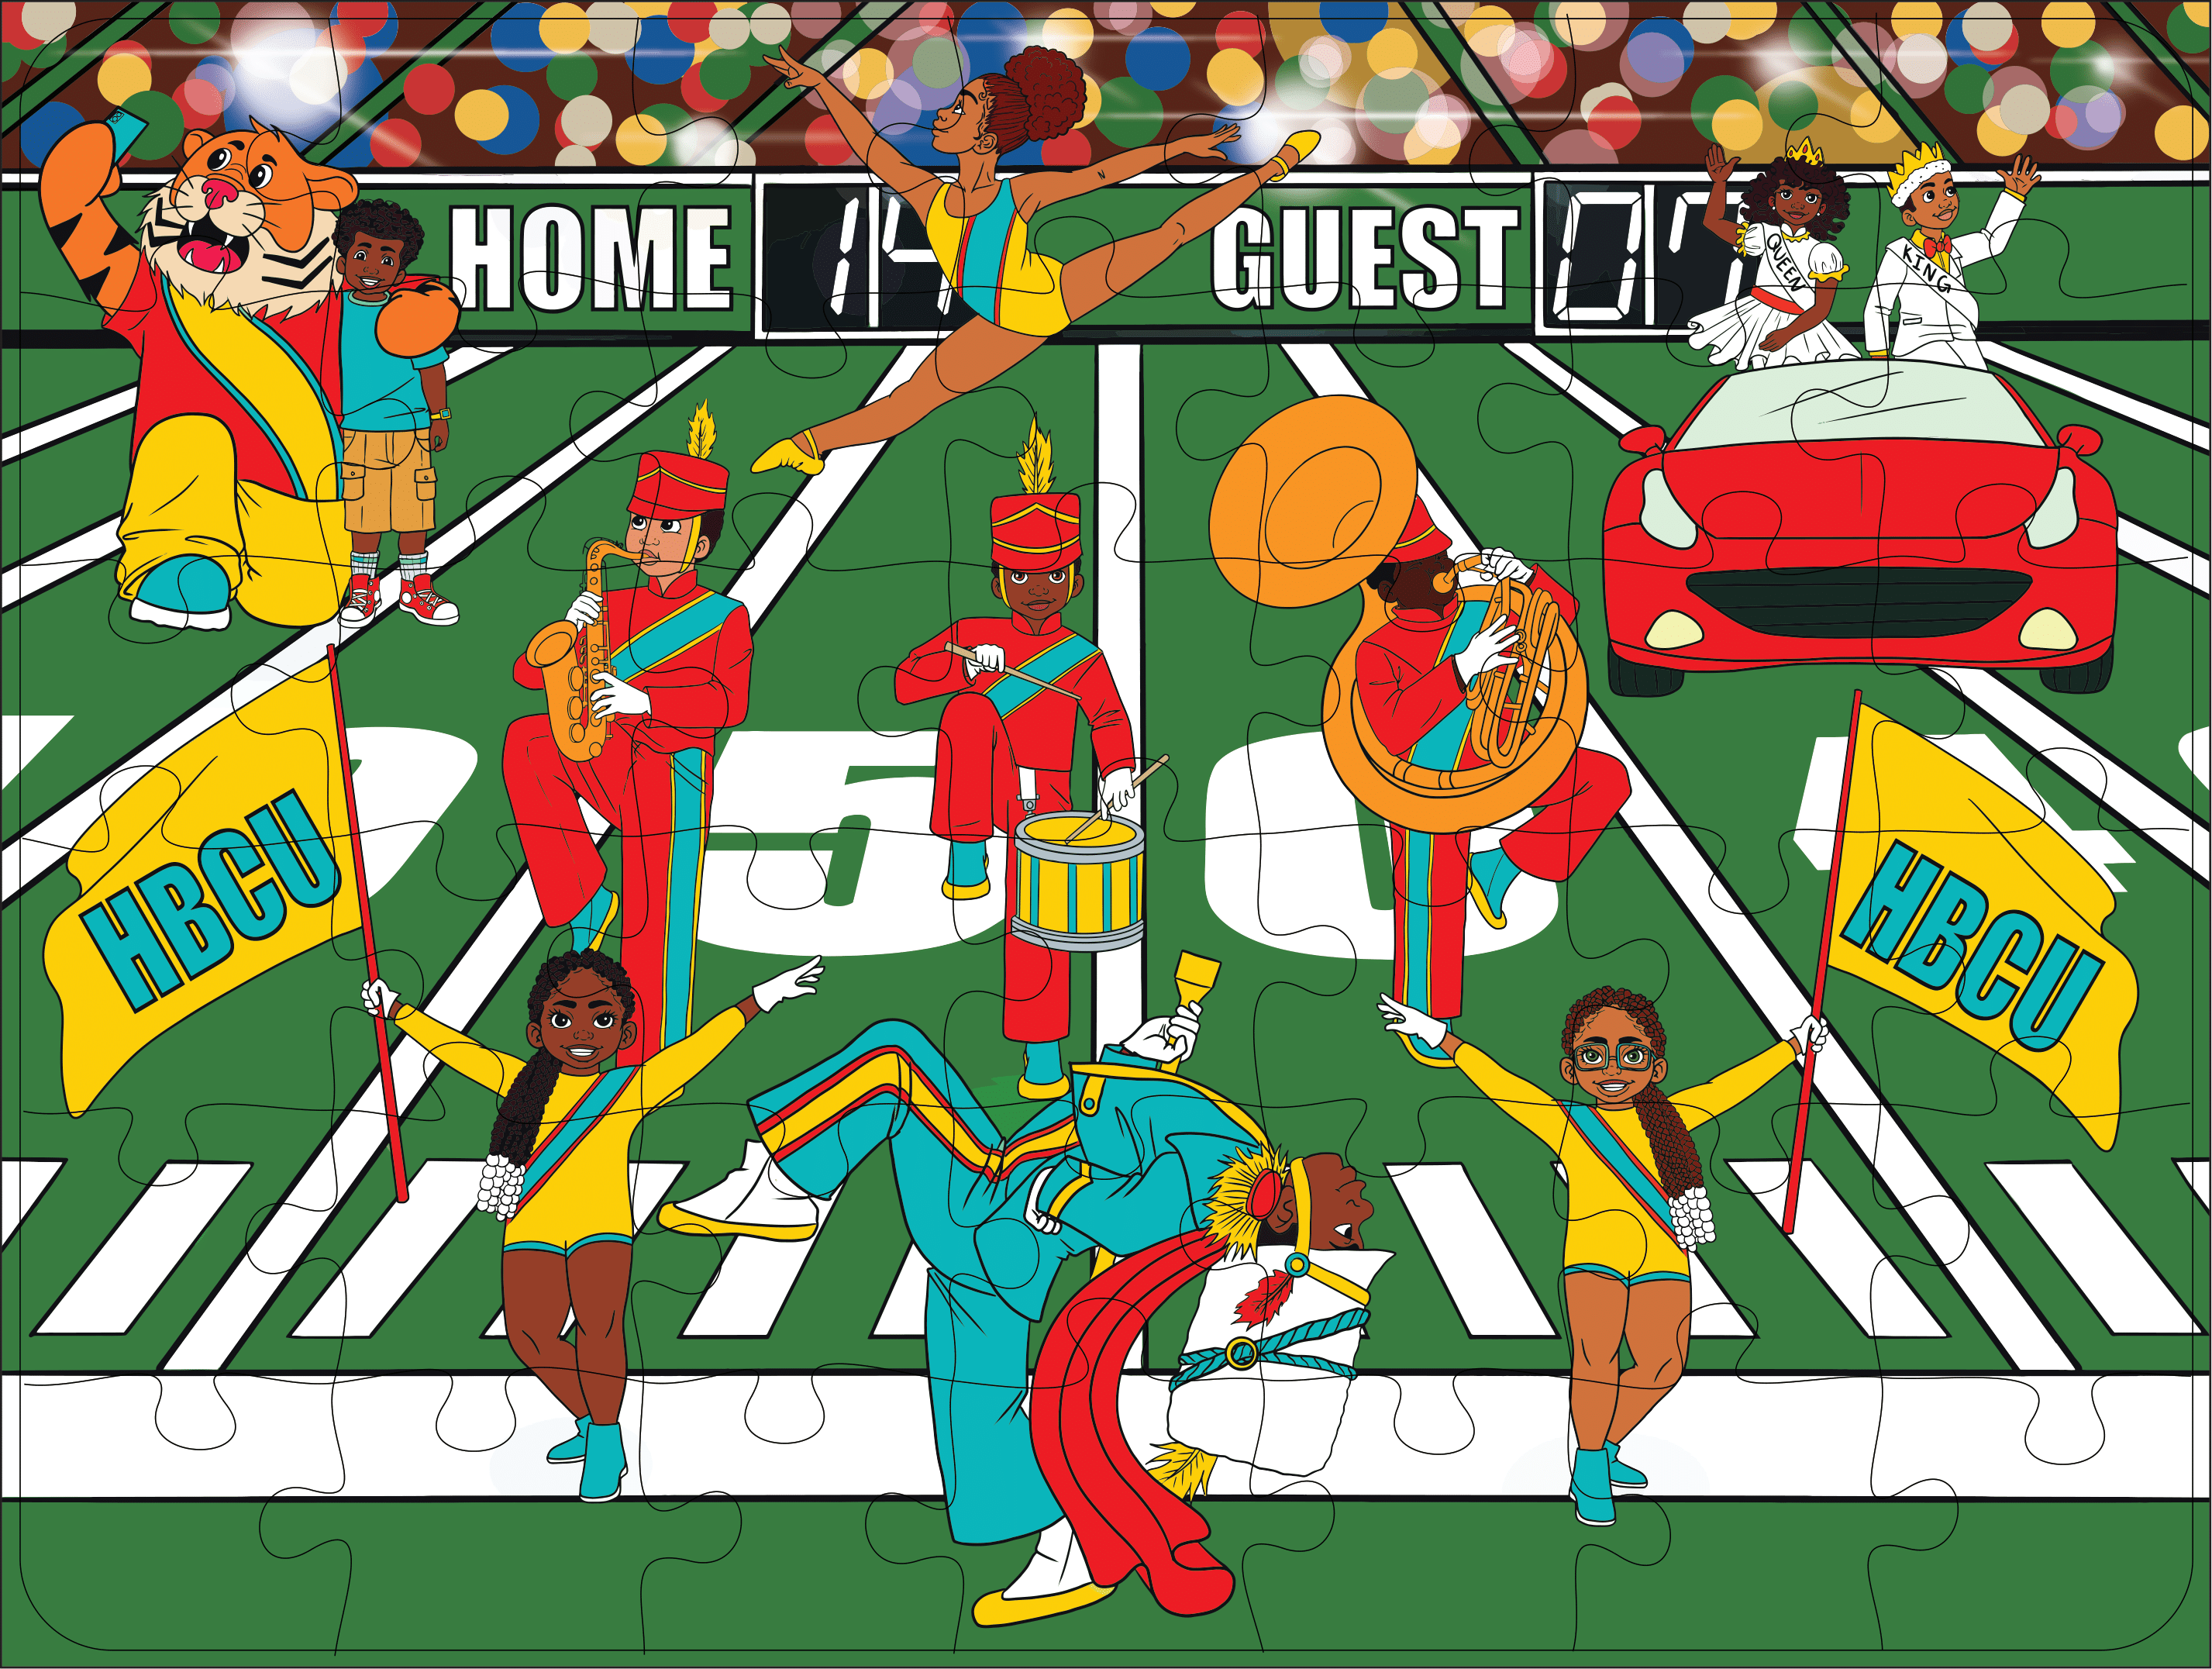 HBCU Homecoming Puzzle